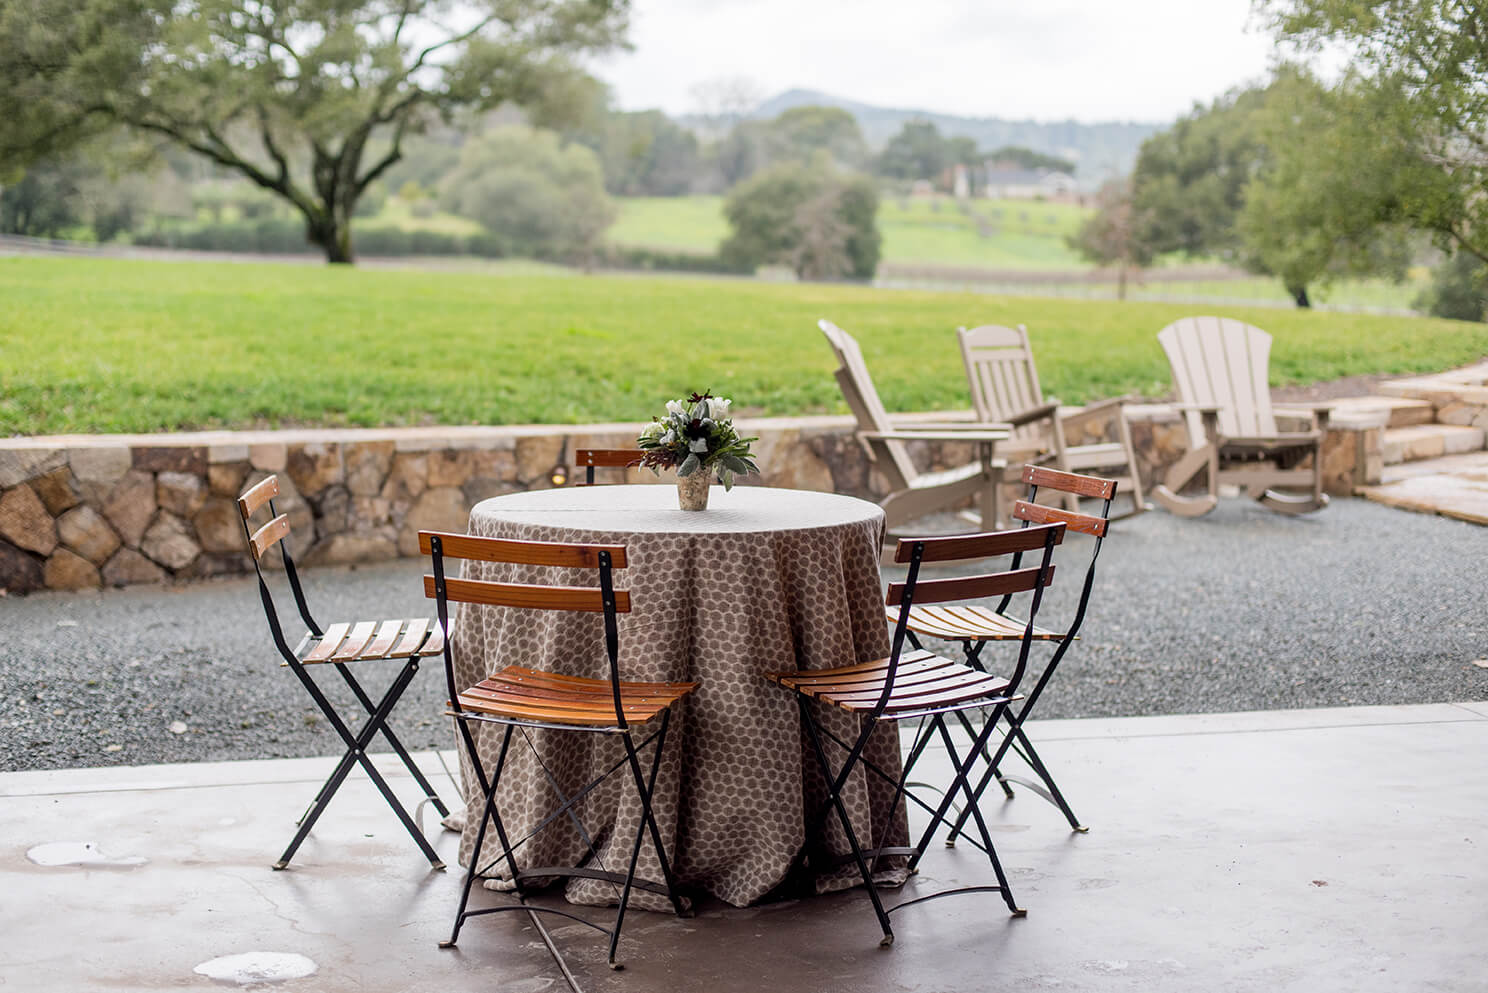 Rustic floral centerpiece on round table in outdoor Sonoma county winery venue